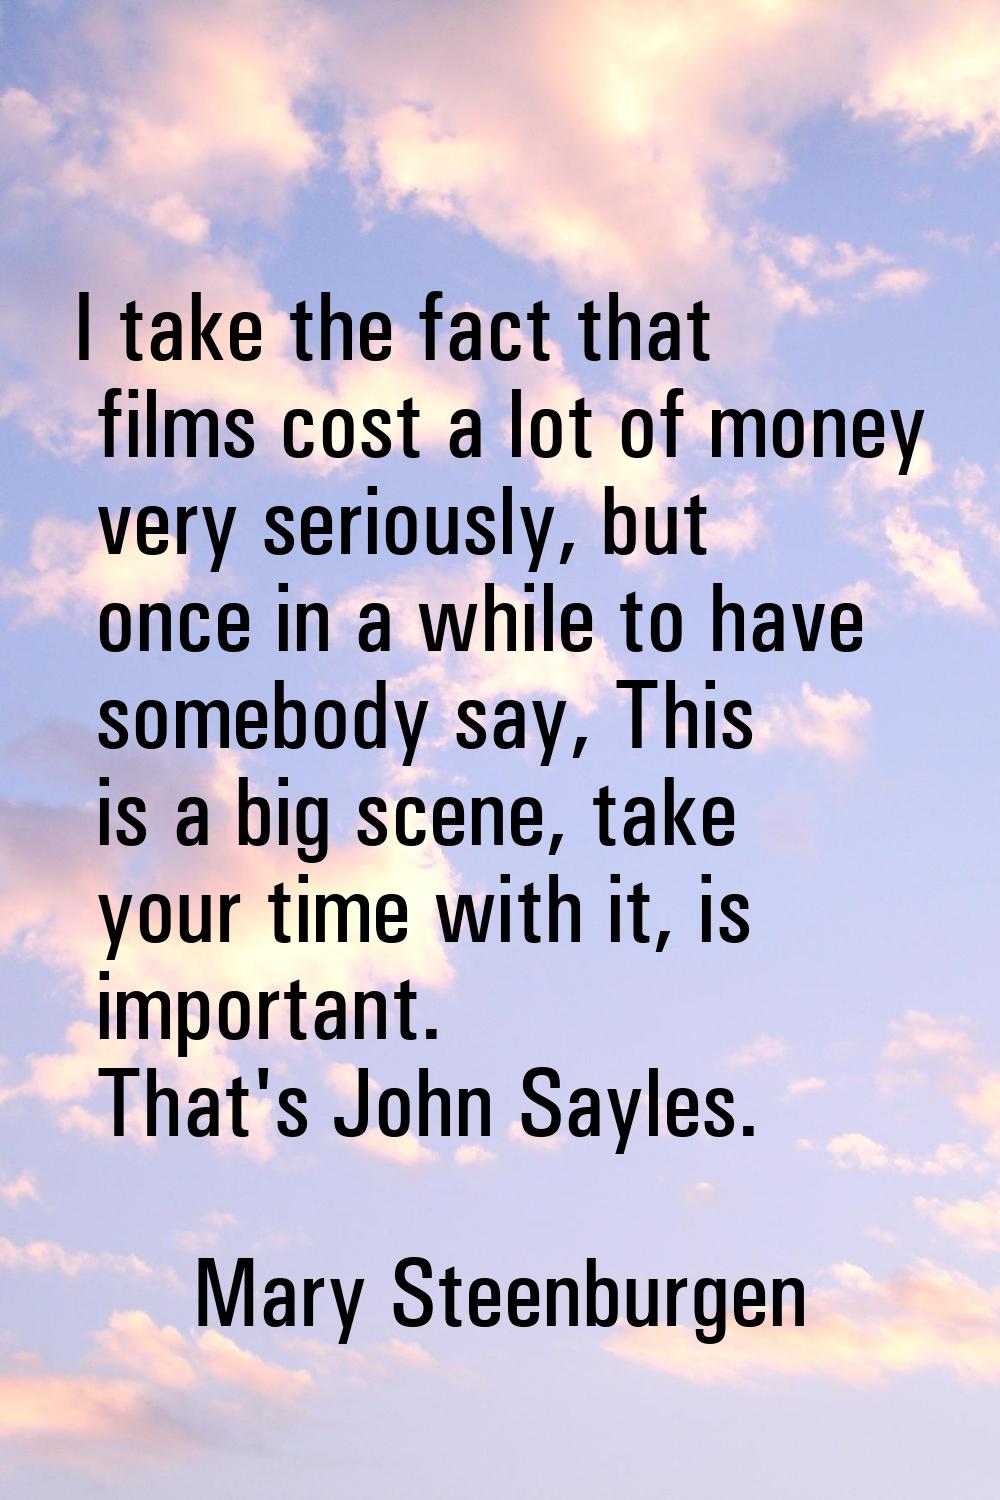 I take the fact that films cost a lot of money very seriously, but once in a while to have somebody